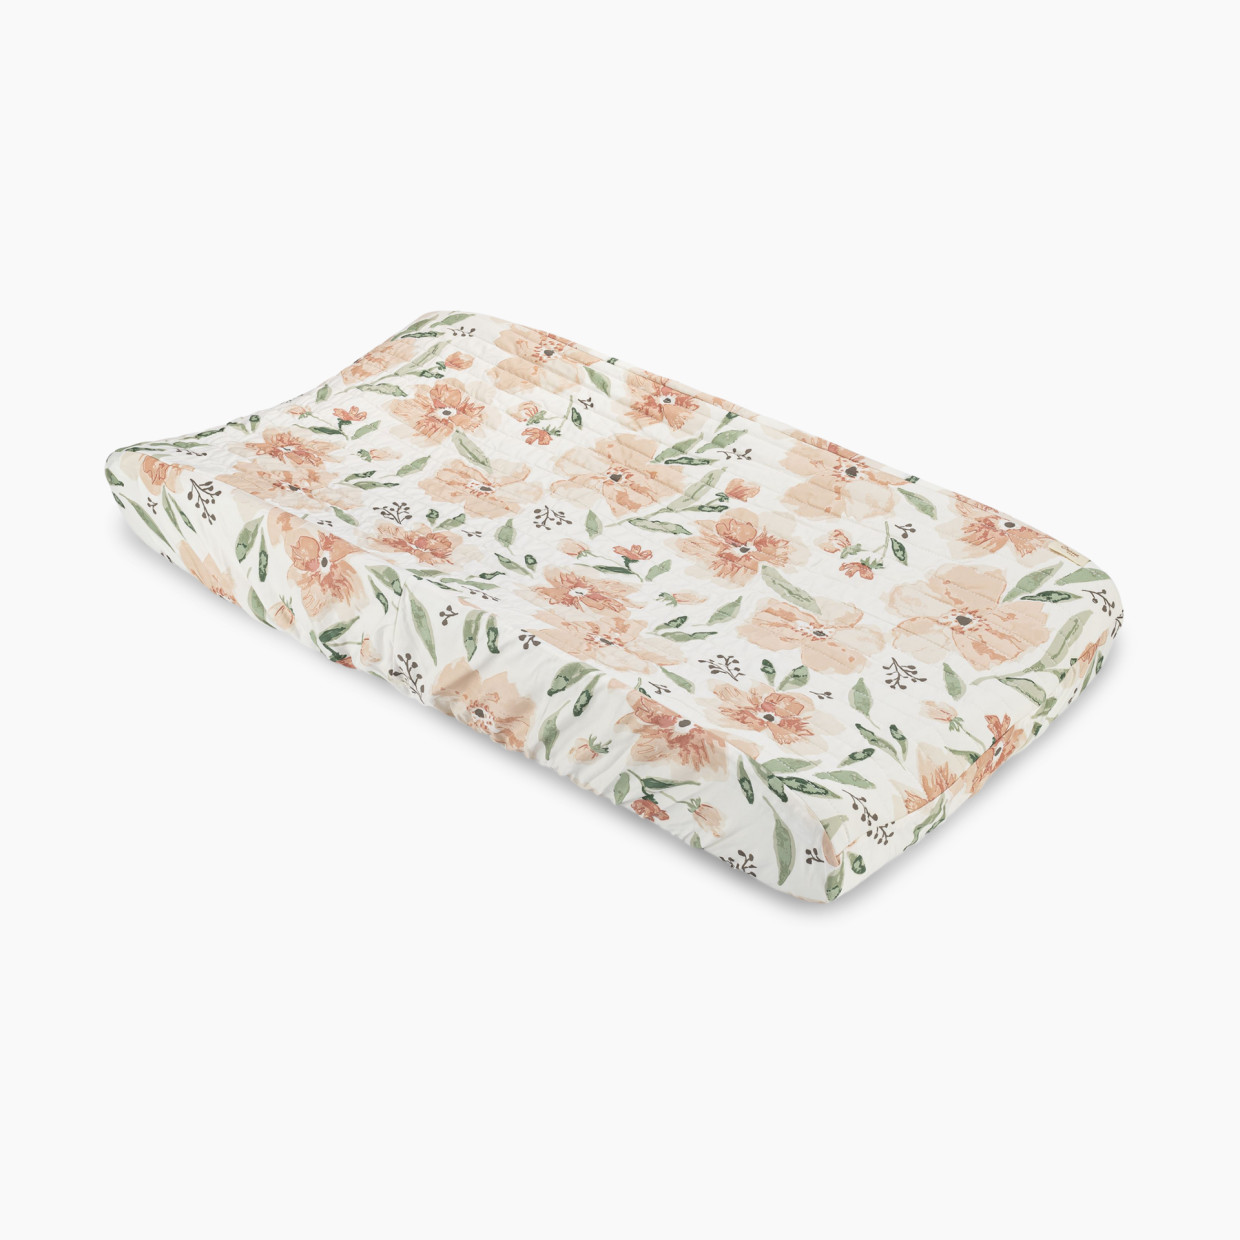 Crane Baby Cotton Quilted Change Pad Cover - Parker Floral.